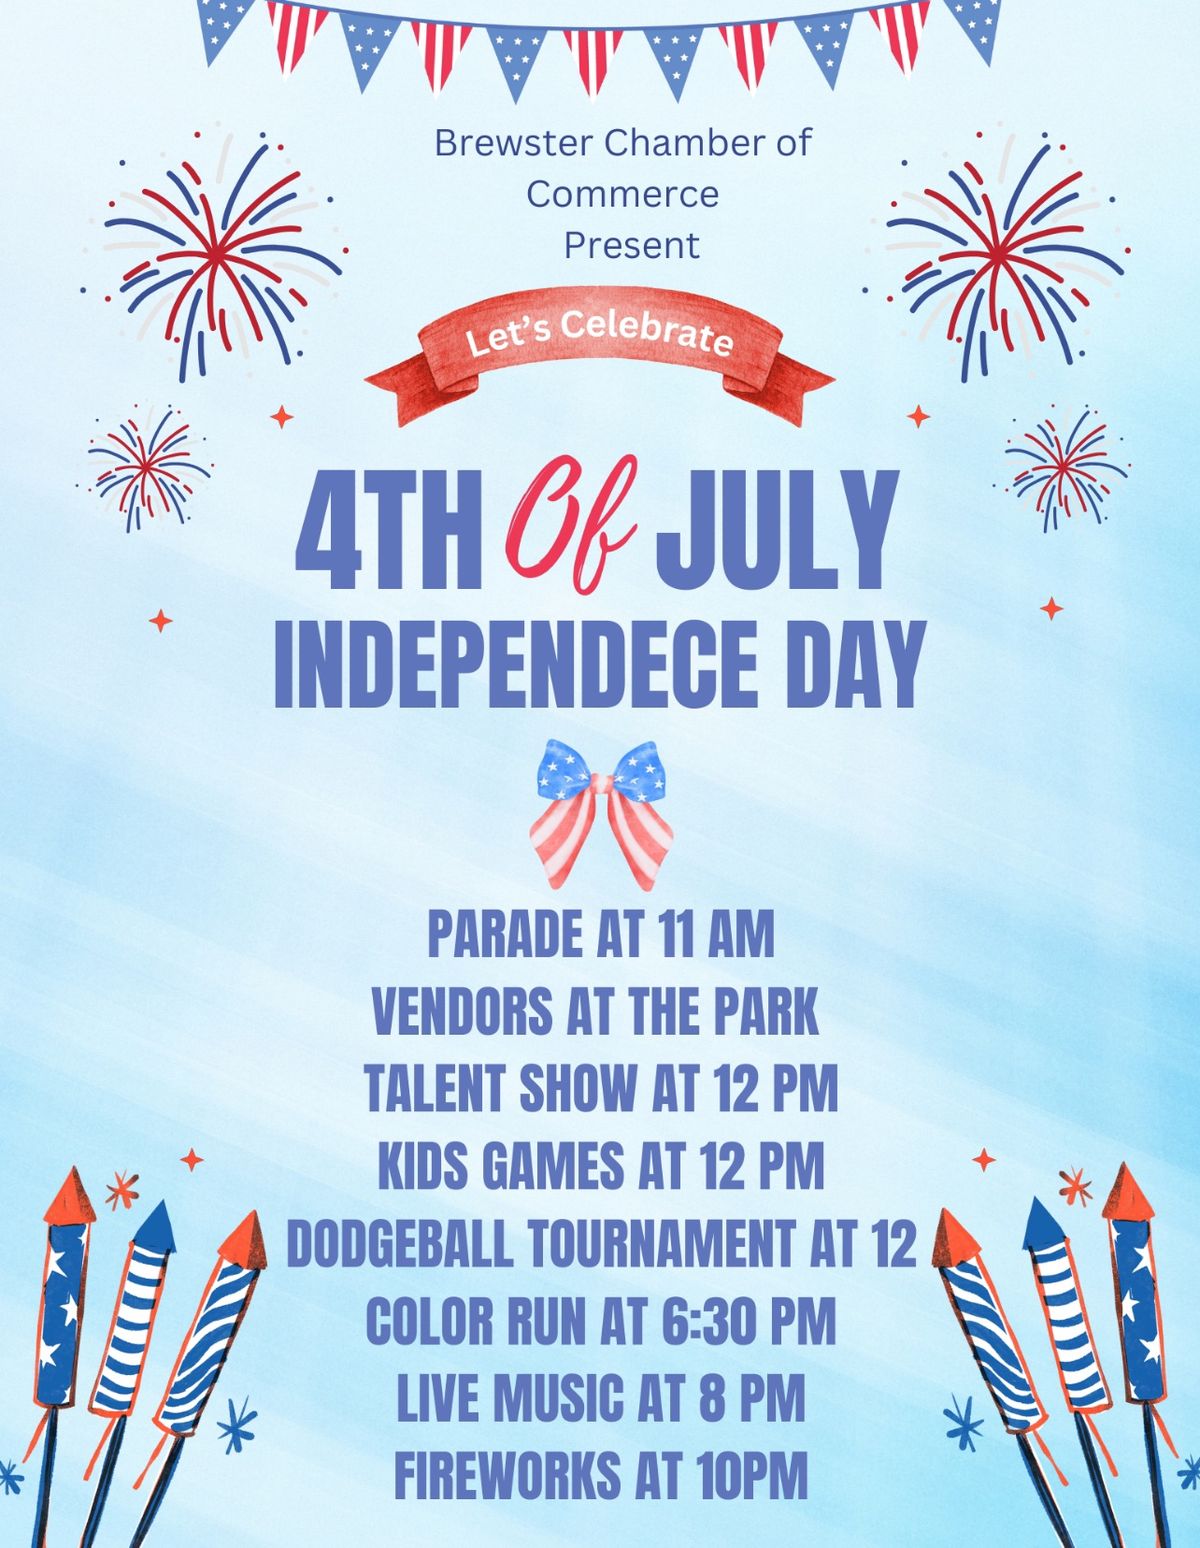 4th of July Celebration in Brewster